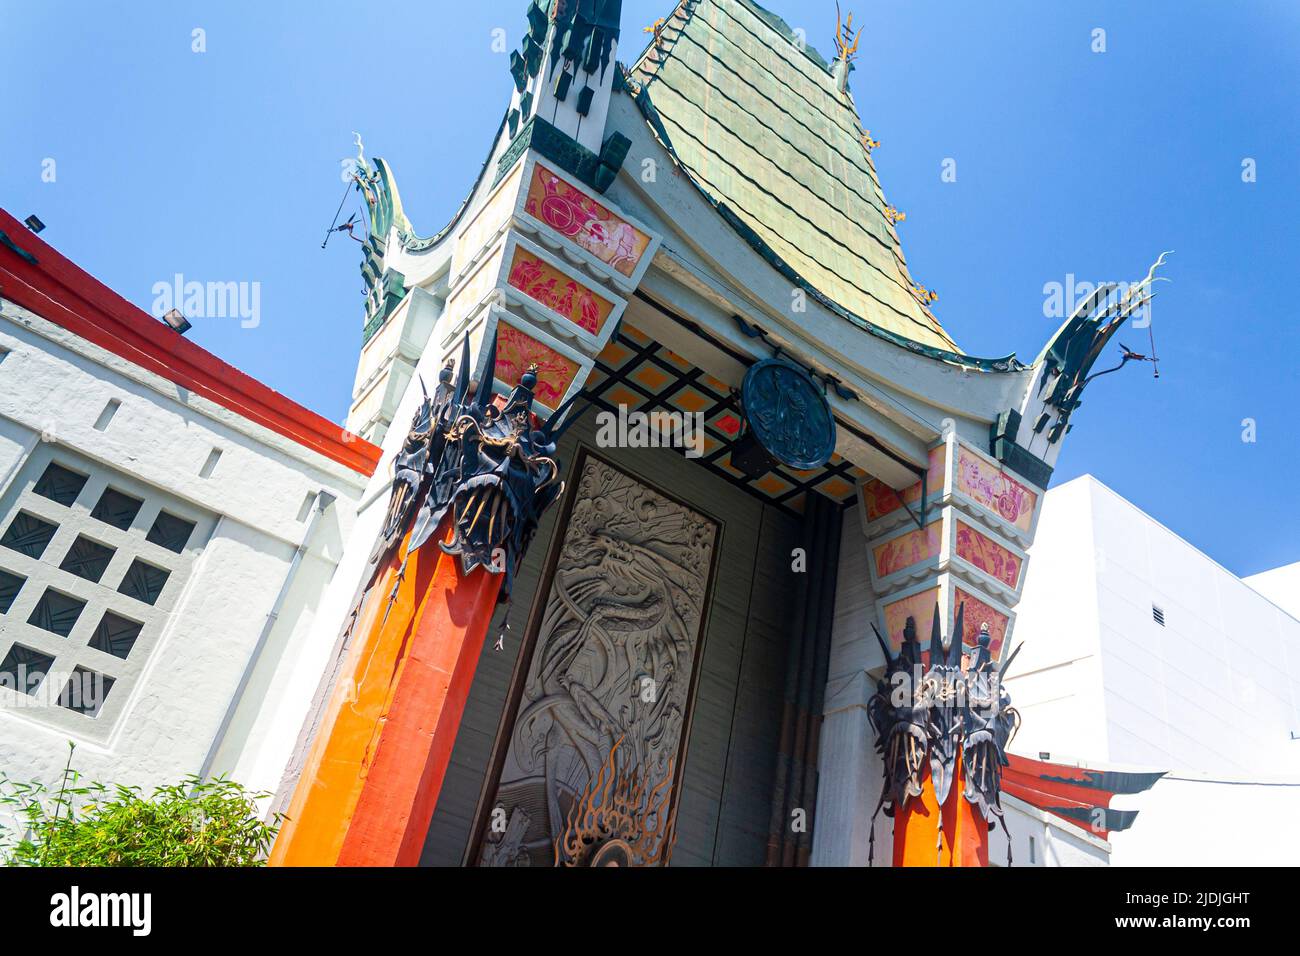 Grauman's Chinese Theatre on the Hollywood Walk of Fame Stock Photo